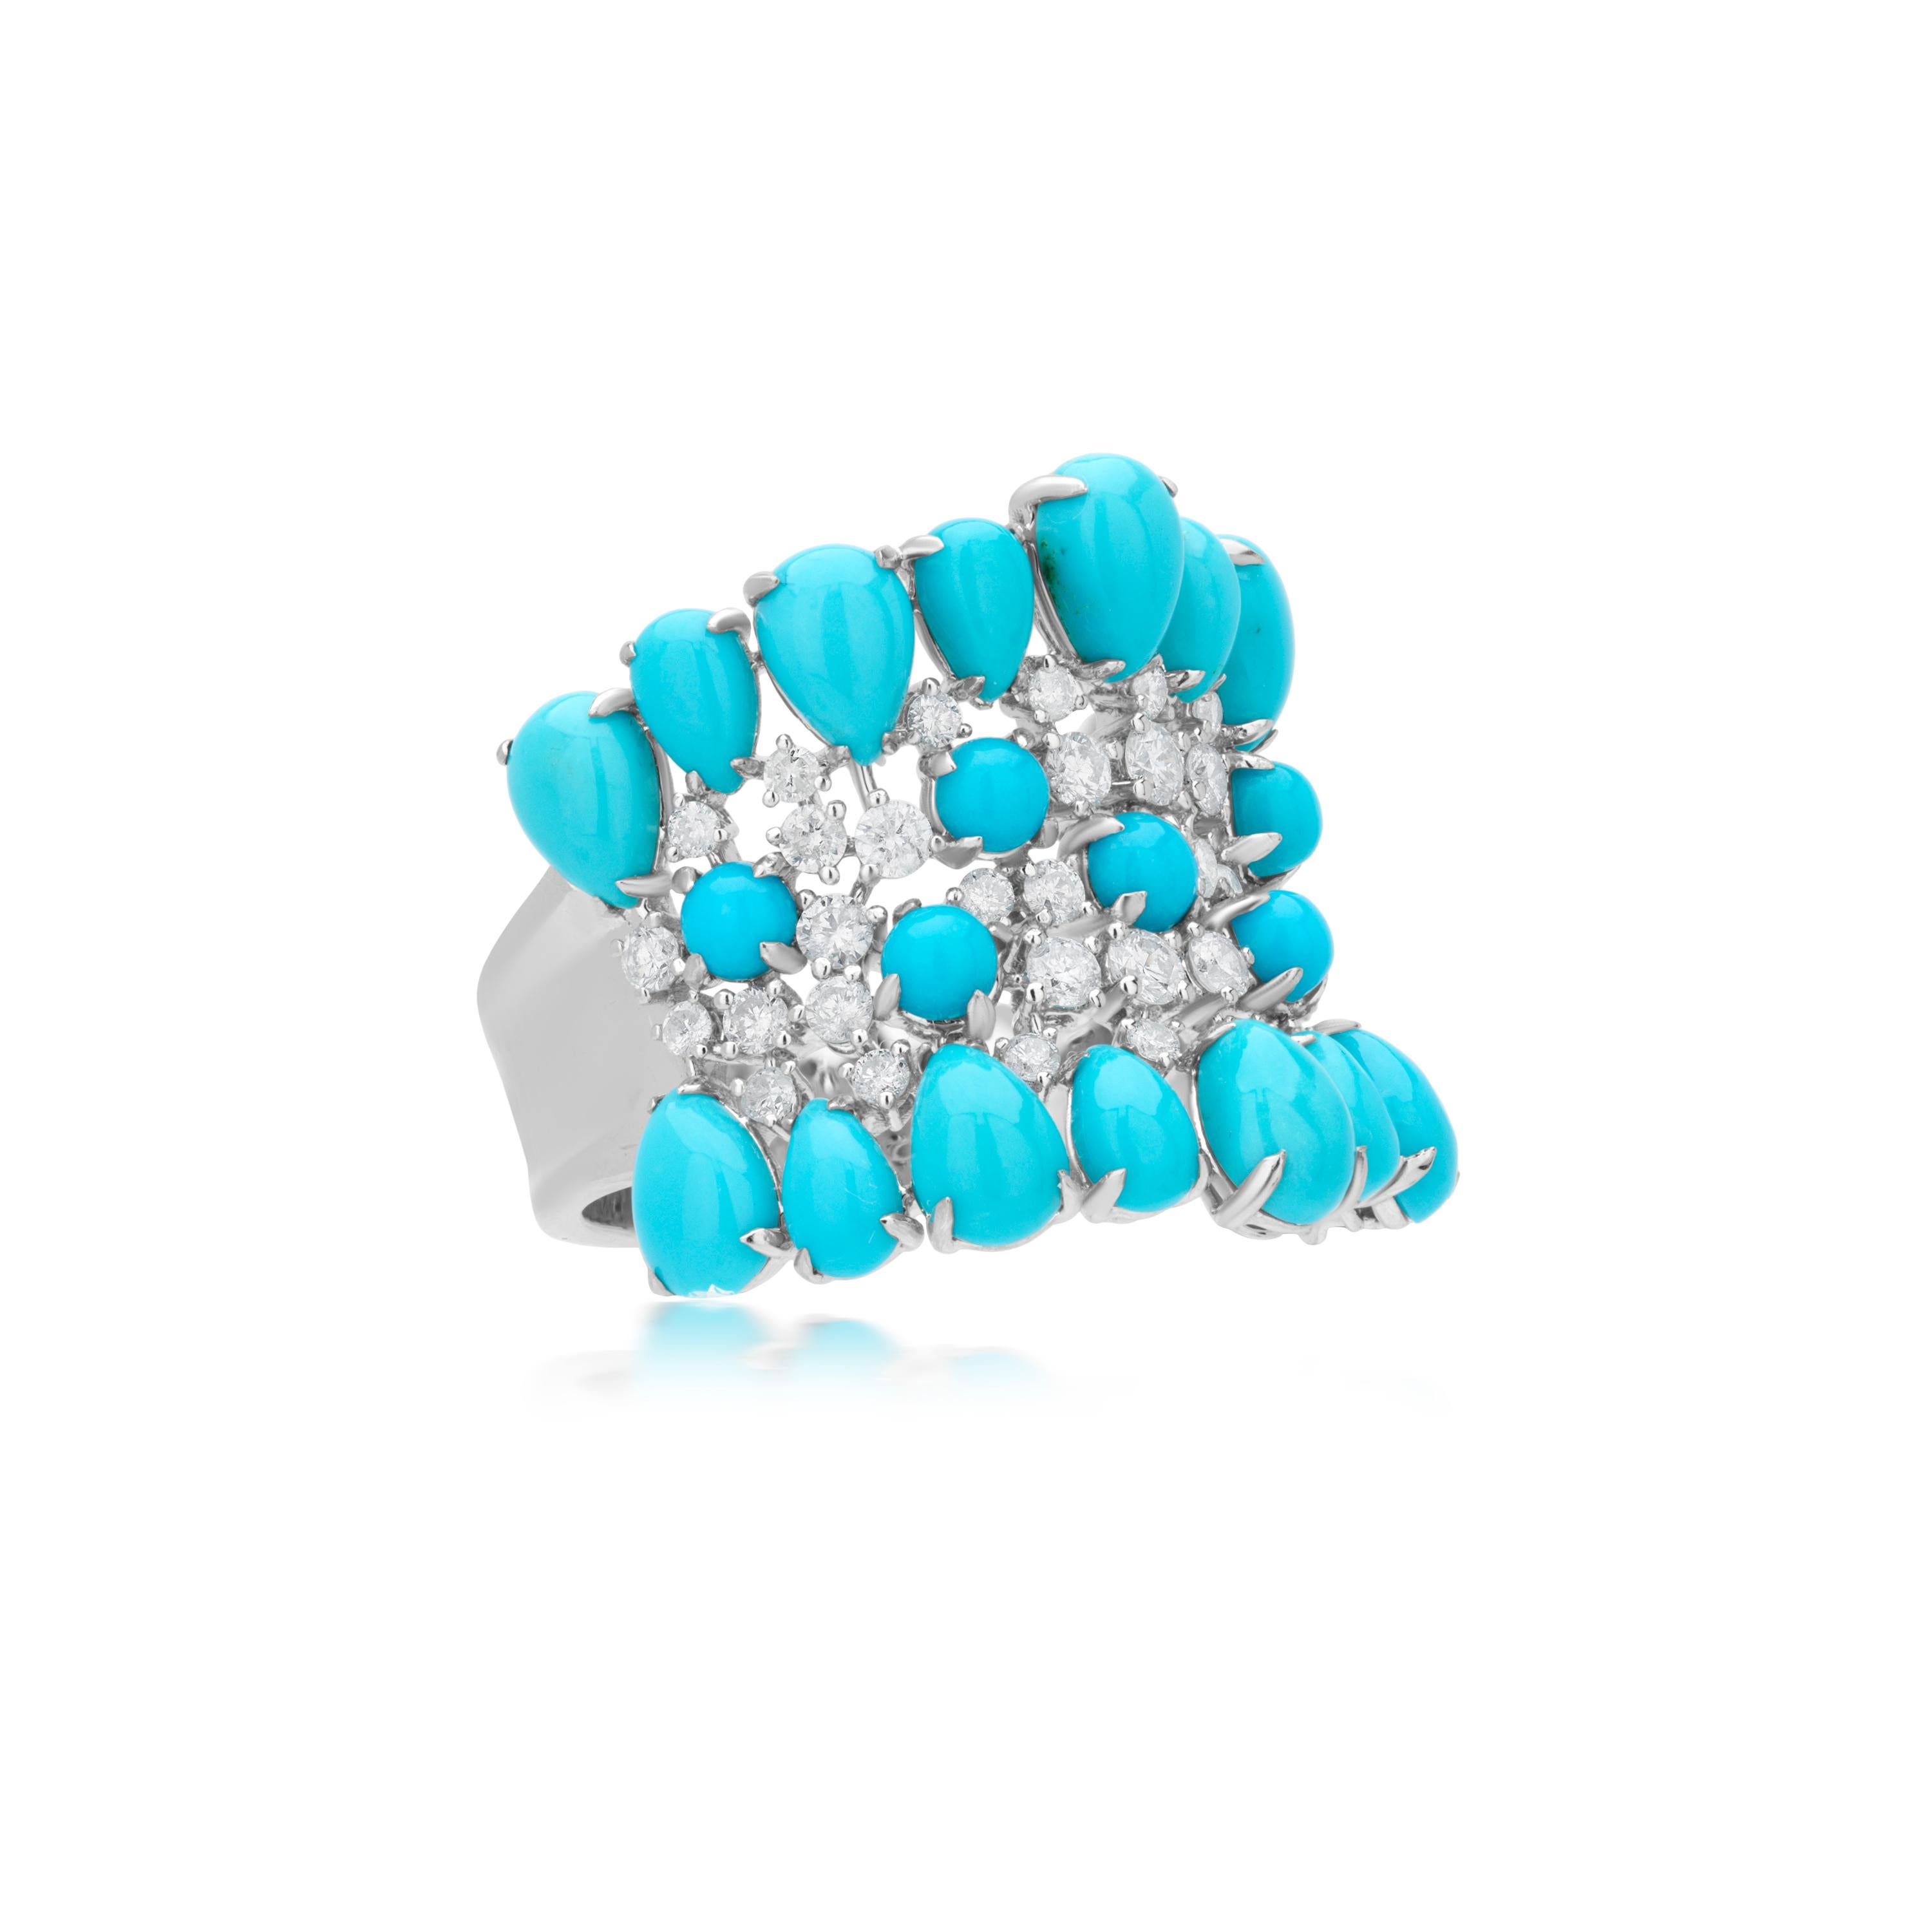 Contemporary Gemistry 7.14cttw. Turquoise and Diamond Cluster Dome Ring in 18k White Gold